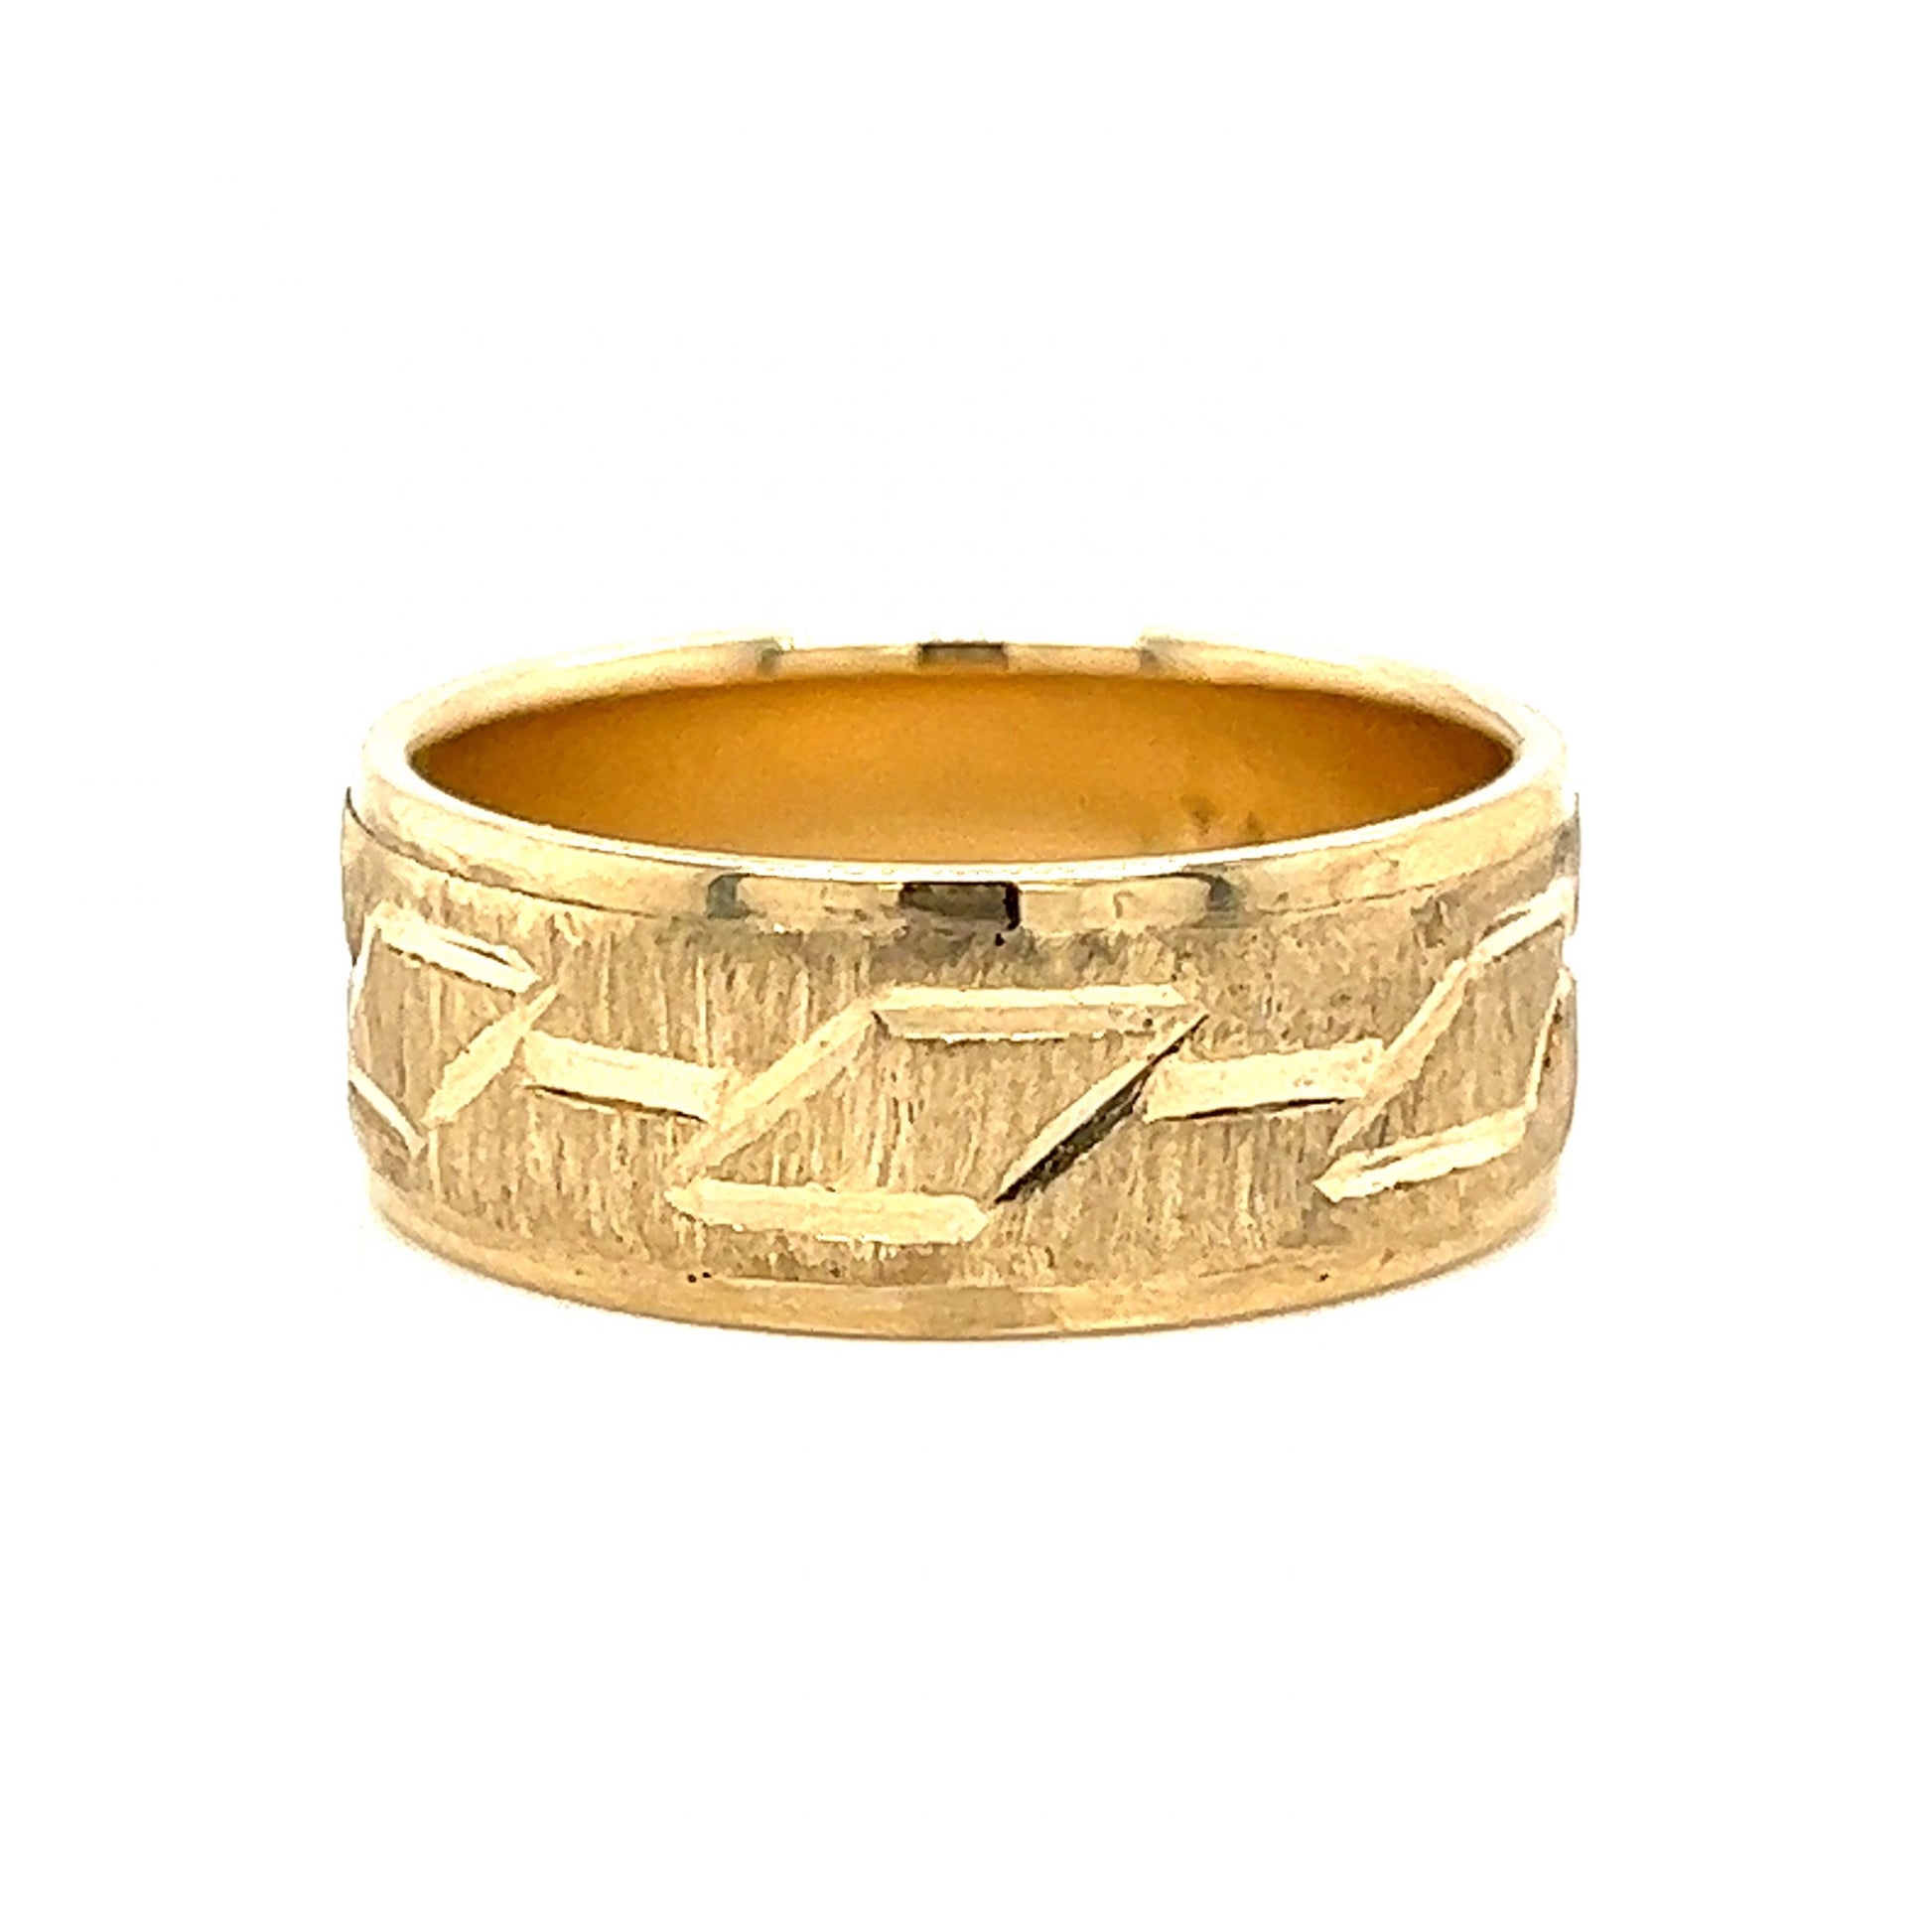 Engraved Textured Wedding Band in 14k Yellow GoldComposition: 14 Karat Yellow GoldRing Size: 6.5Total Gram Weight: 6.0 gInscription: 14k